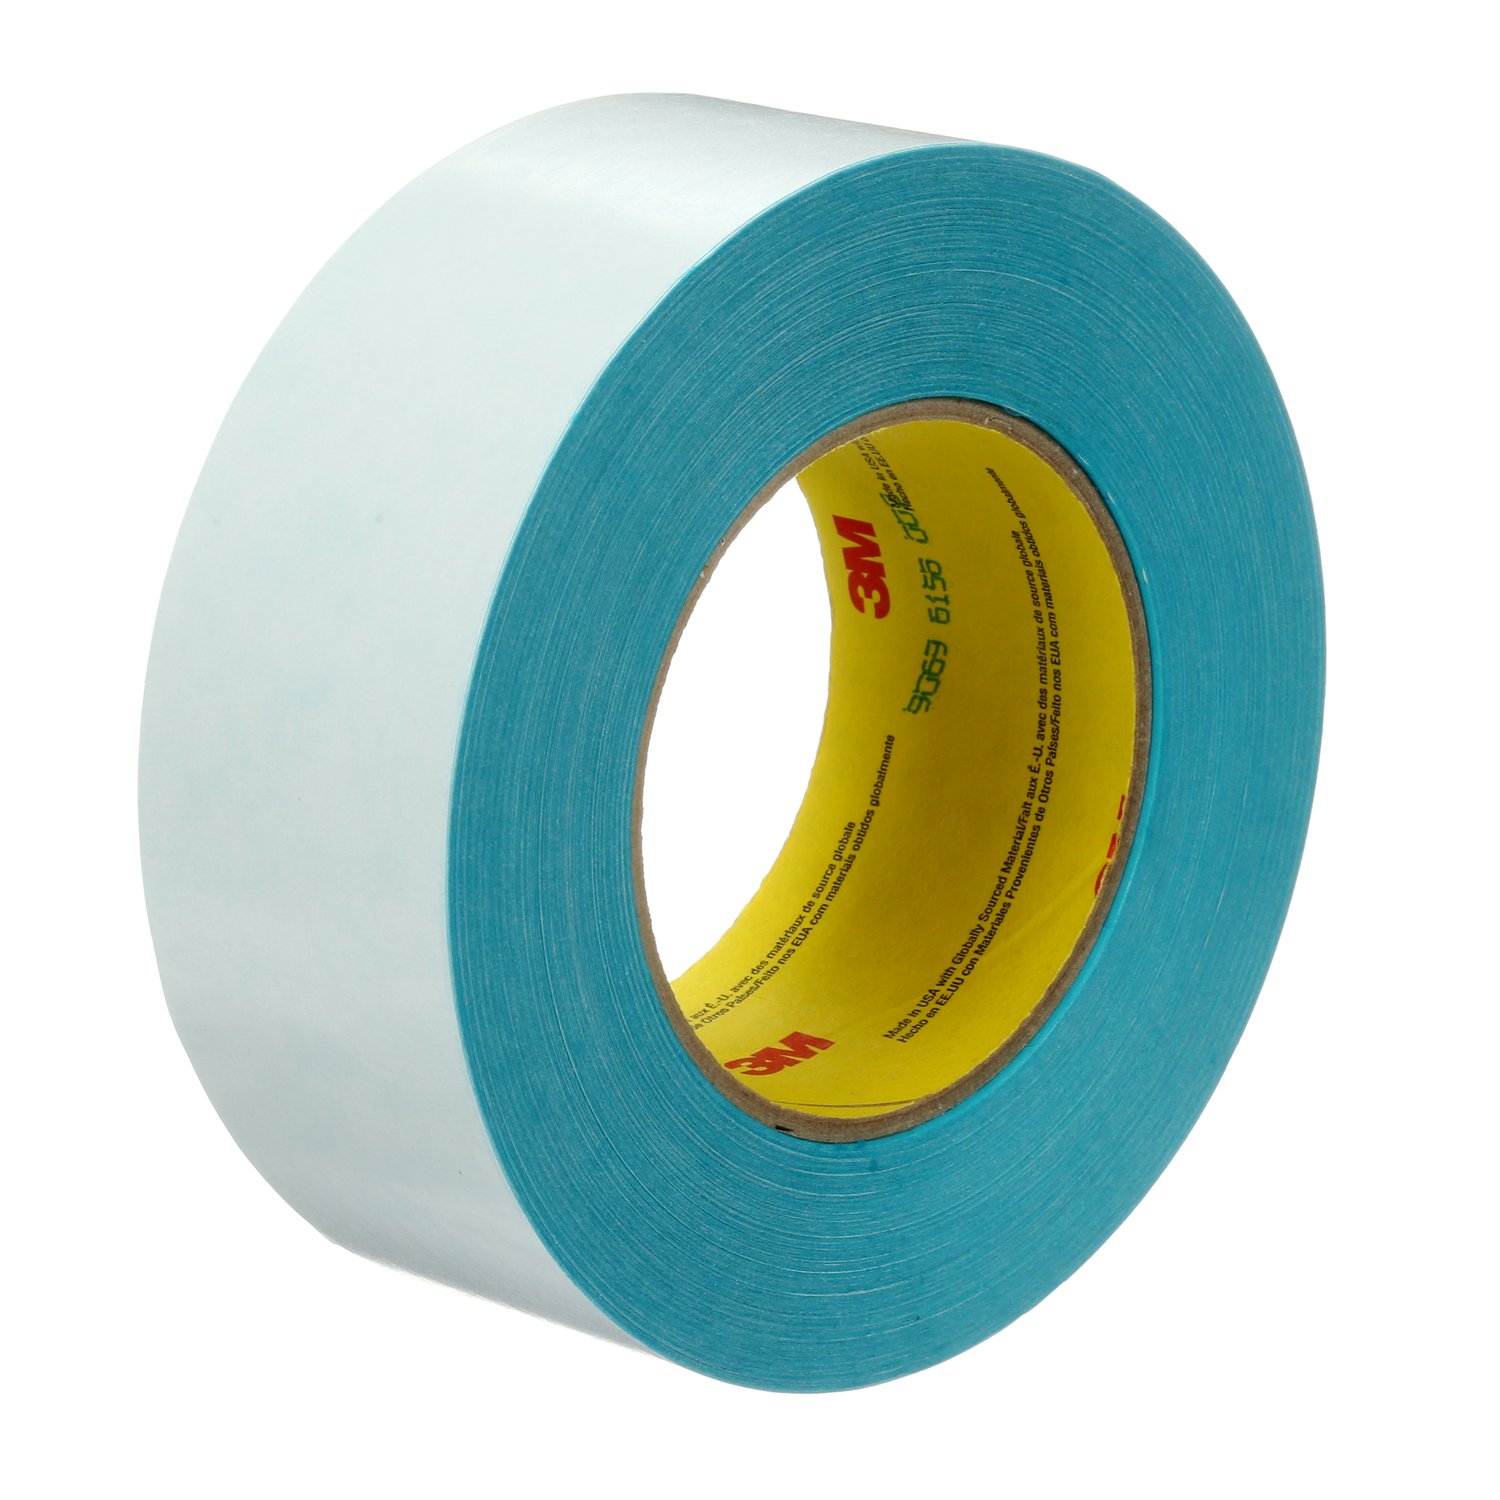 7100028140 - 3M Repulpable Double Coated Splice Tape 9069, Blue, 48 mm x 5 5m, 3
mil, 24 Rolls/Case